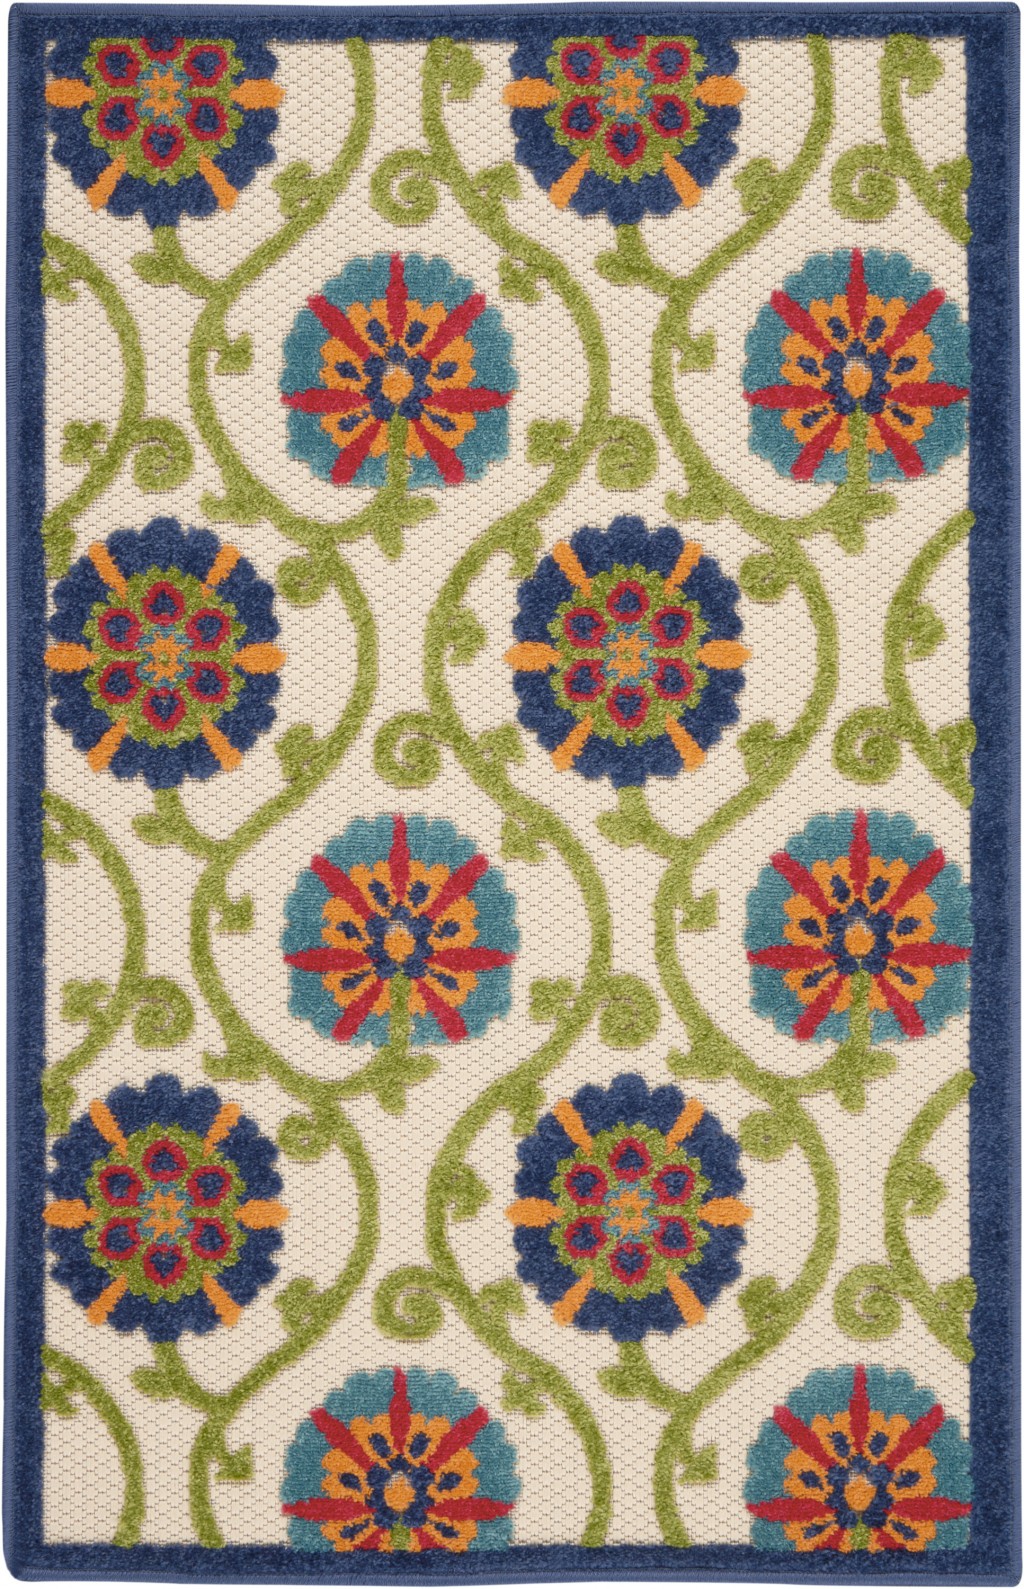 3' X 4' Ivory And Blue Floral Indoor Outdoor Area Rug-384970-1